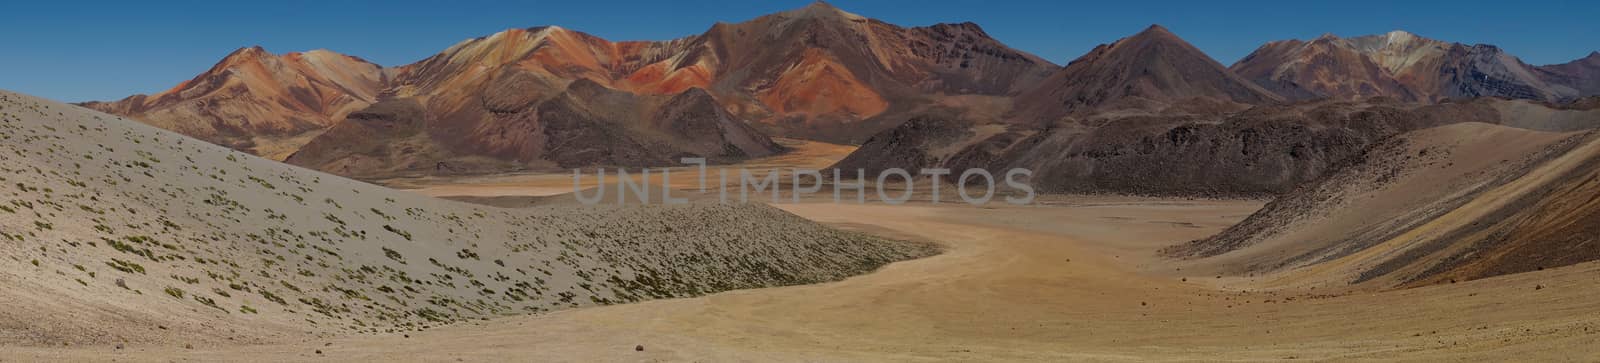 Colourful mountain landscape at Suriplaza in the Atacama Desert of north east Chile. The altitude is in excess of 4,000 metres.